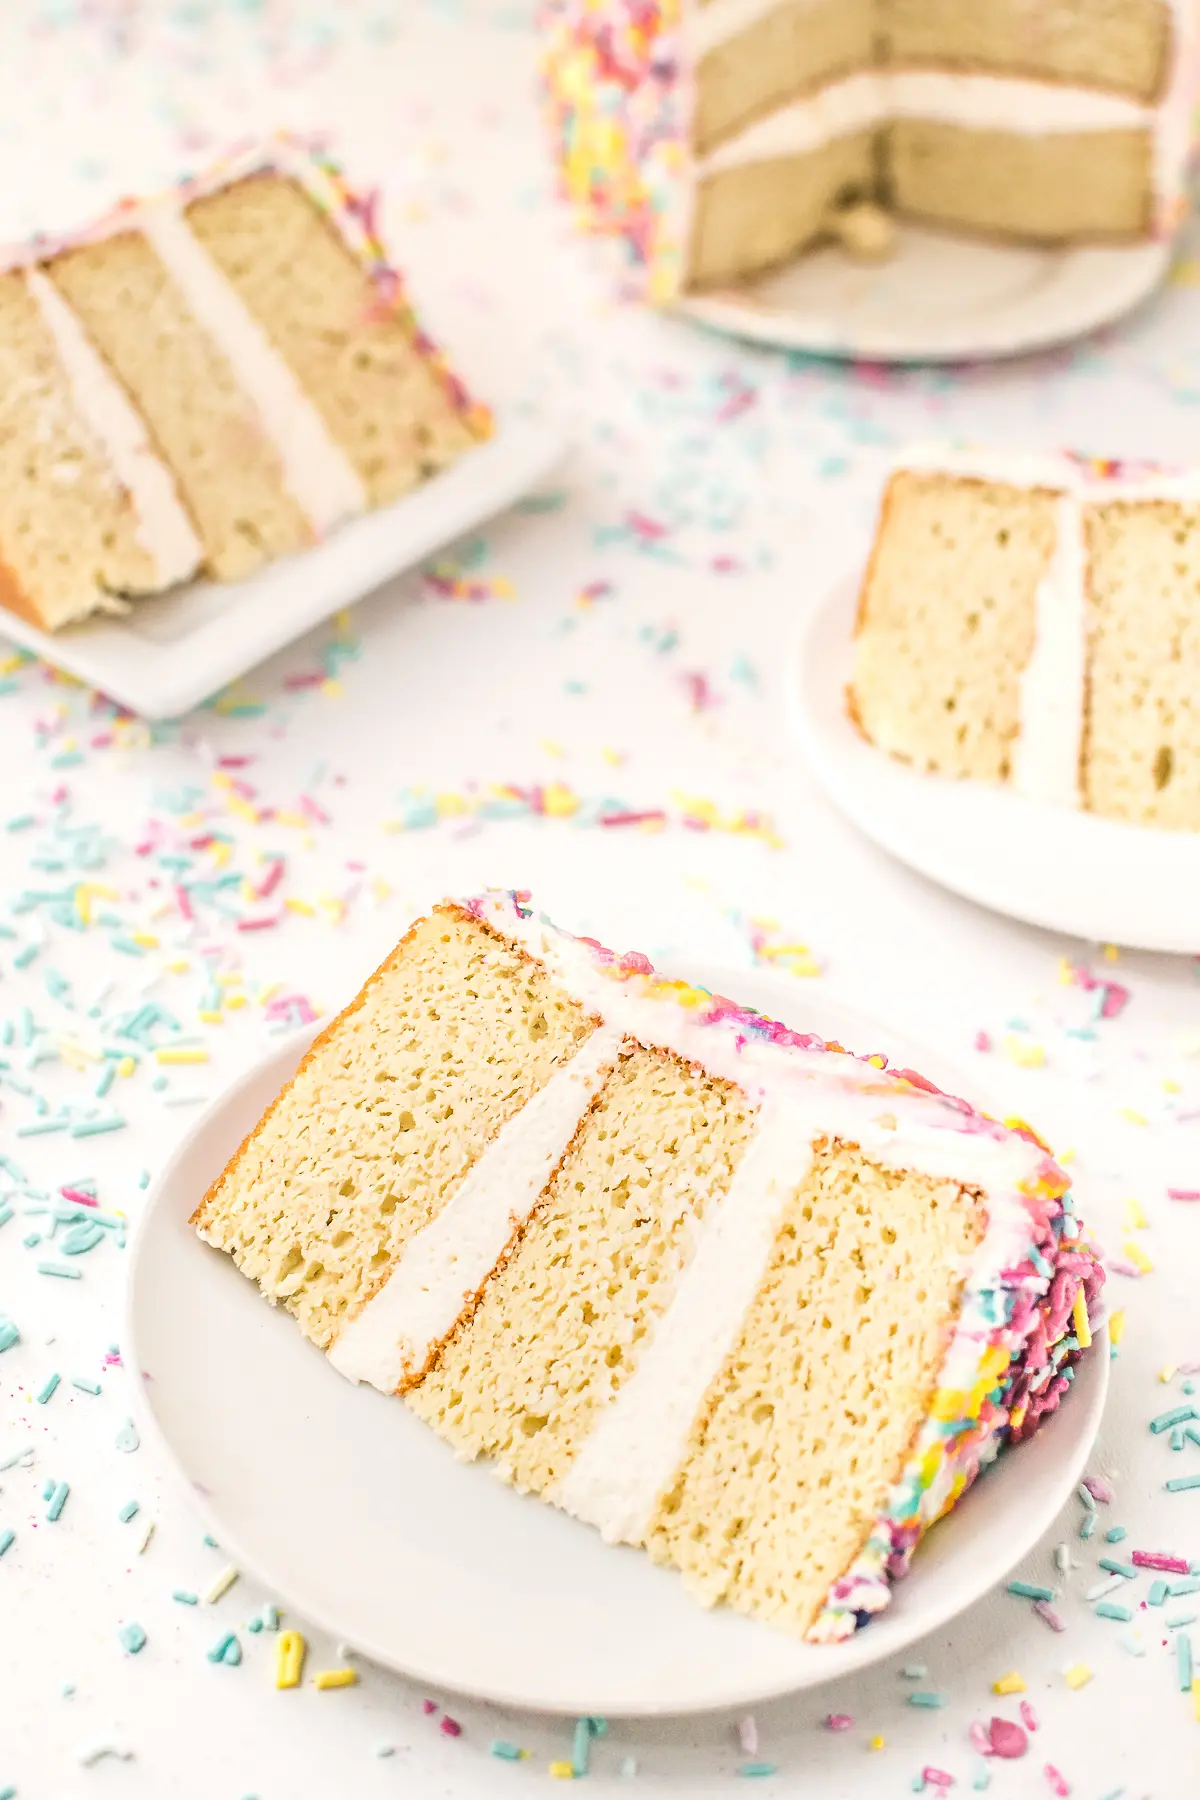 Slices of low carb birthday cake with white icing surrounded by sprinkles 